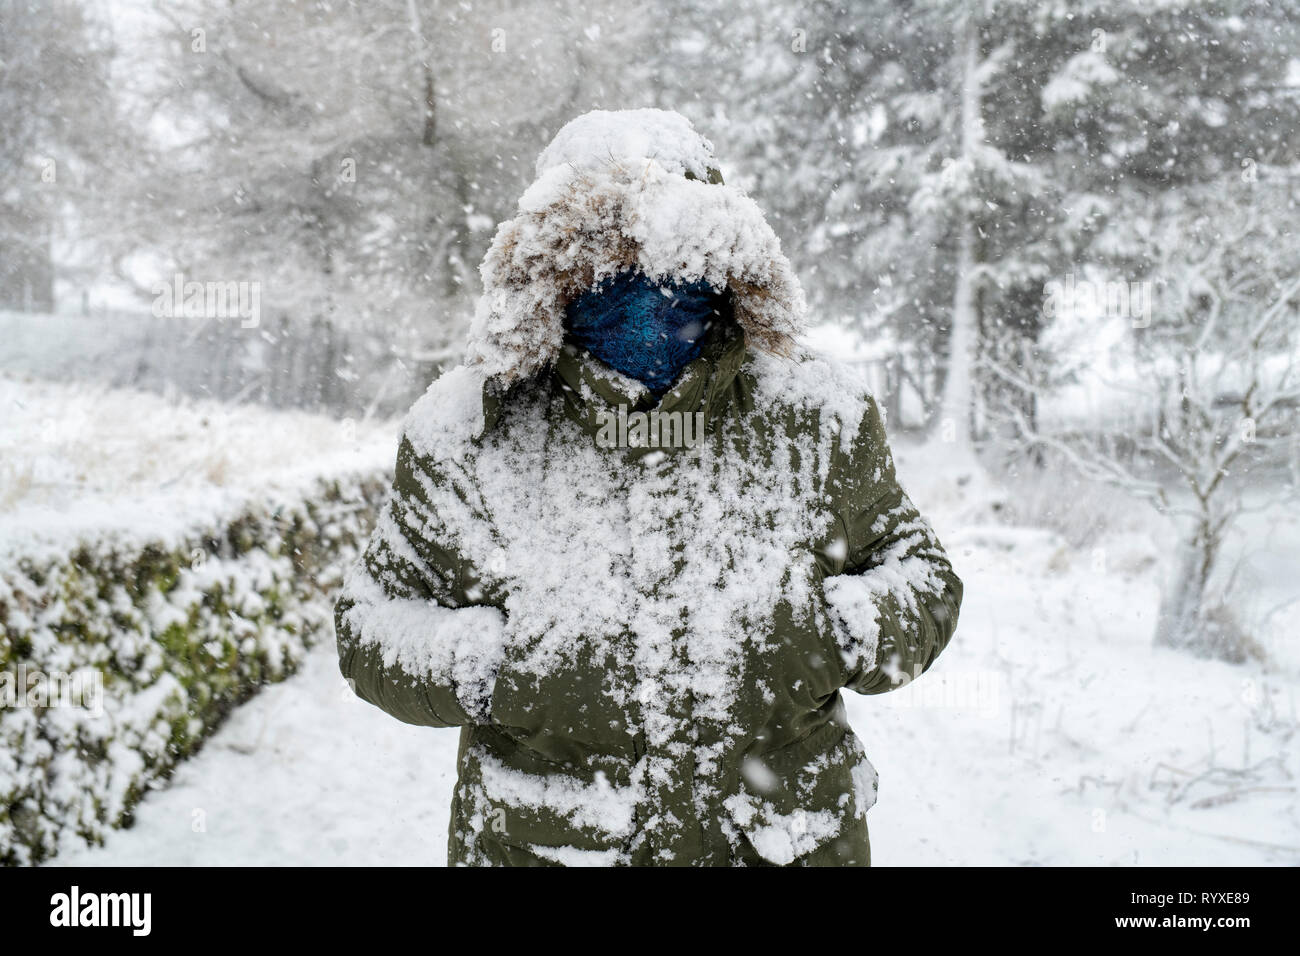 Man in a winter coat covered in snow. Scotland Stock Photo